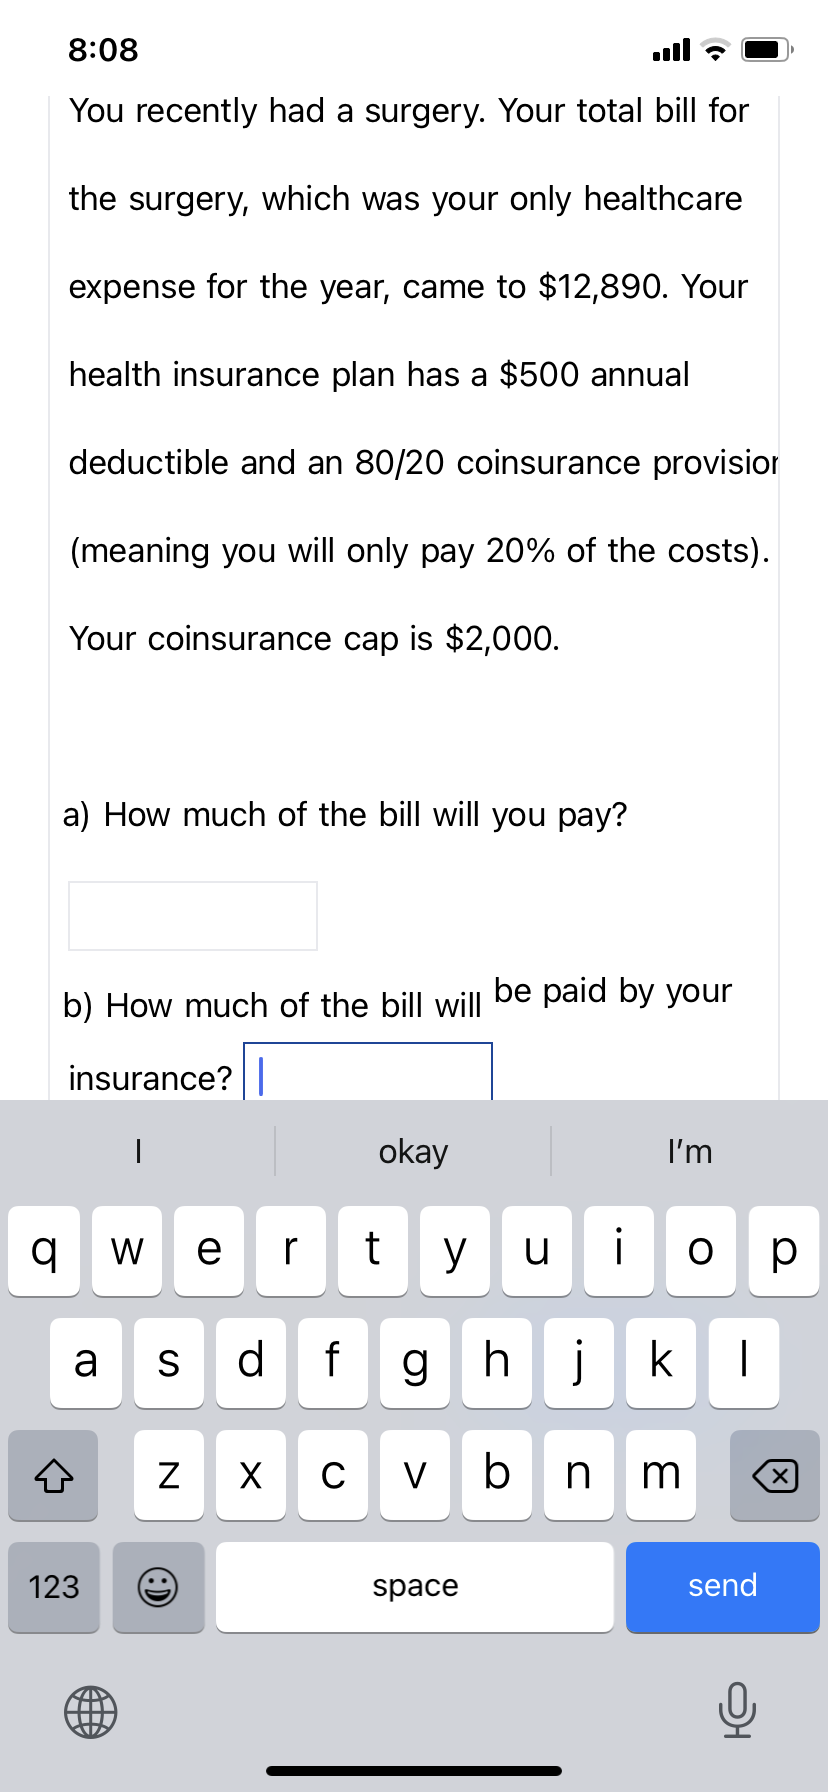 q
8:08
You recently had a surgery. Your total bill for
the surgery, which was your only healthcare
expense for the year, came to $12,890. Your
health insurance plan has a $500 annual
deductible and an 80/20 coinsur nce provision
(meaning you will only pay 20% of the costs).
Your coinsurance cap is $2,000.
a) How much of the bill will you pay?
b) How much of the bill will be paid by your
insurance? |
I
a
123
wer
S d f
N
O
okay
t y
X с V
ج ال..
u
space
i
ghjk
bn
I'm
3
ор
|
send
X